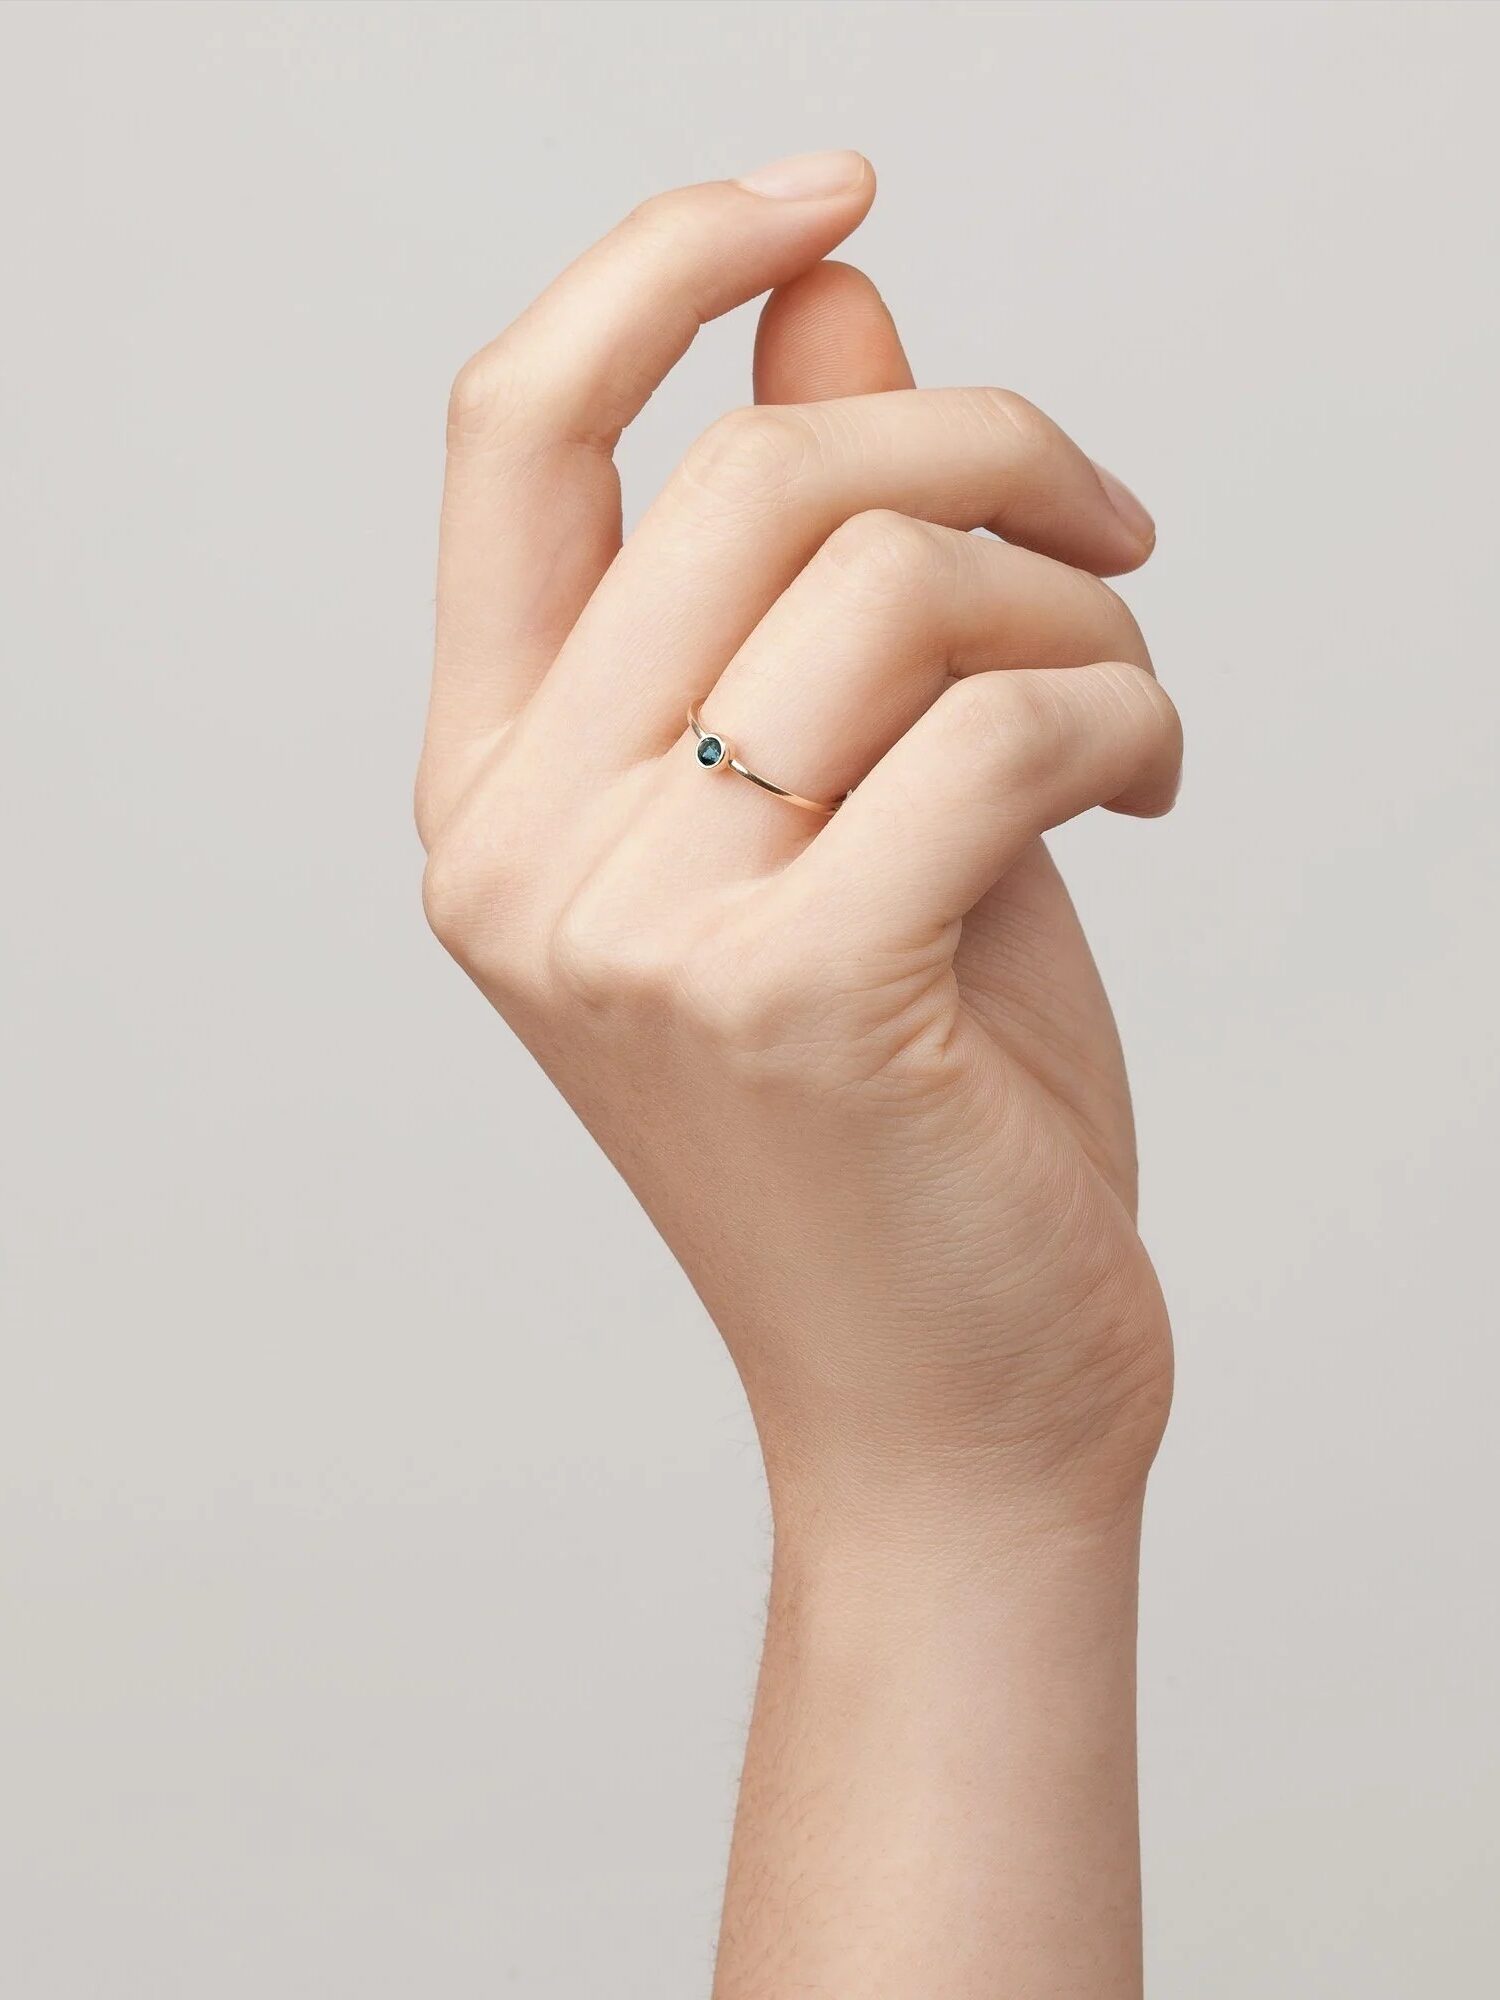 A close-up image of a person's hand making an 'ok' gesture with fingers touching to form a circle, adorned with a small ring.